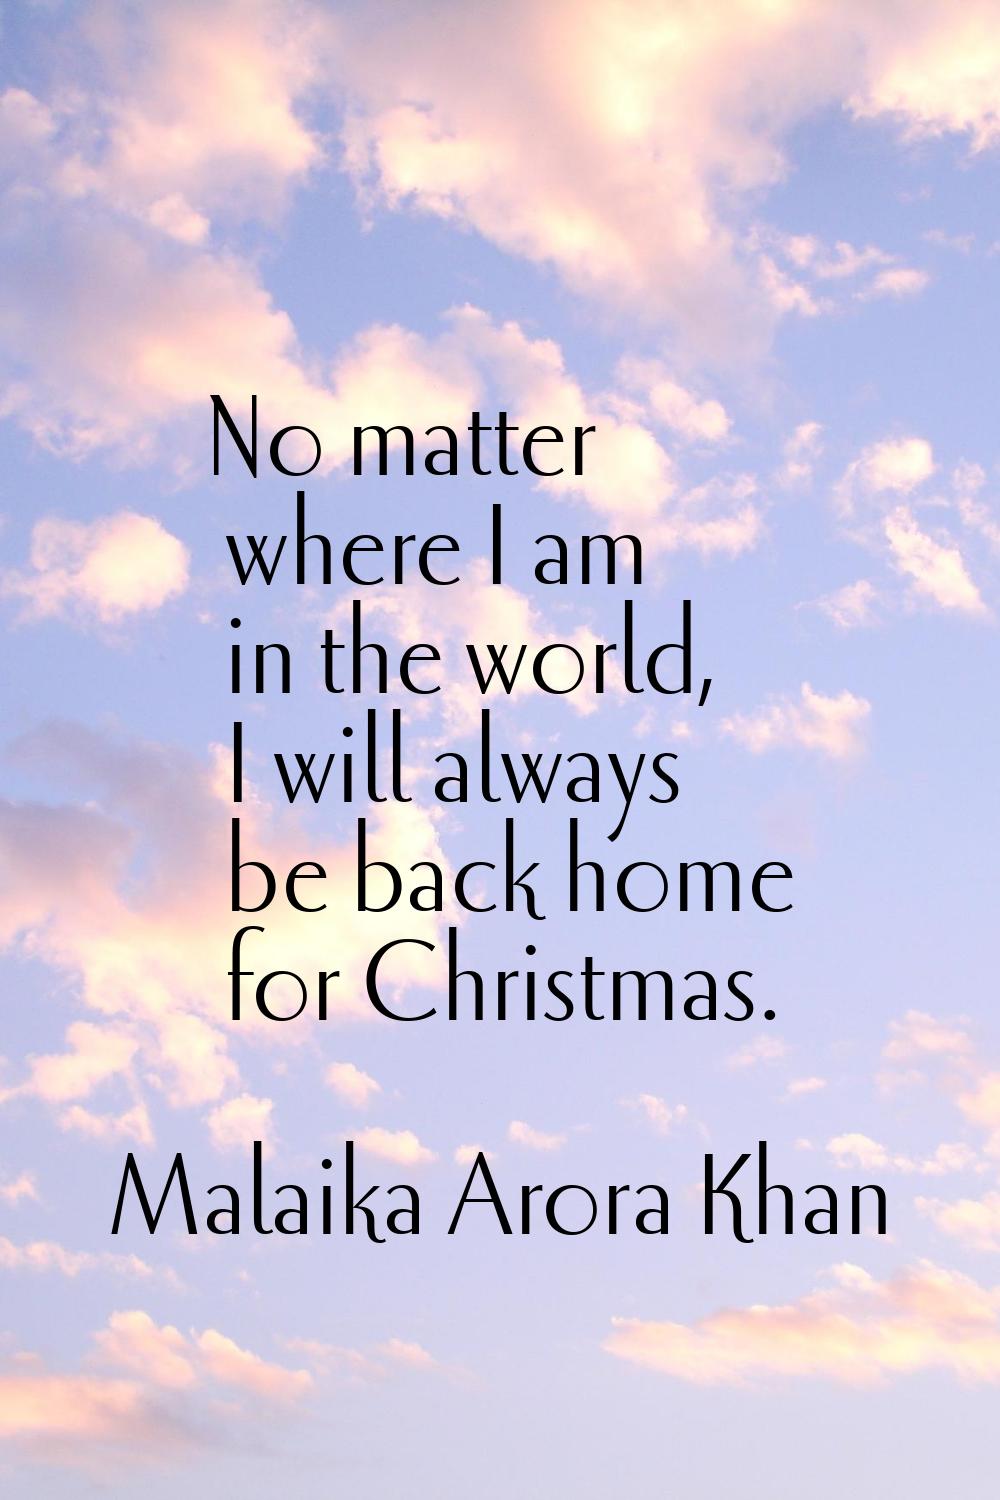 No matter where I am in the world, I will always be back home for Christmas.